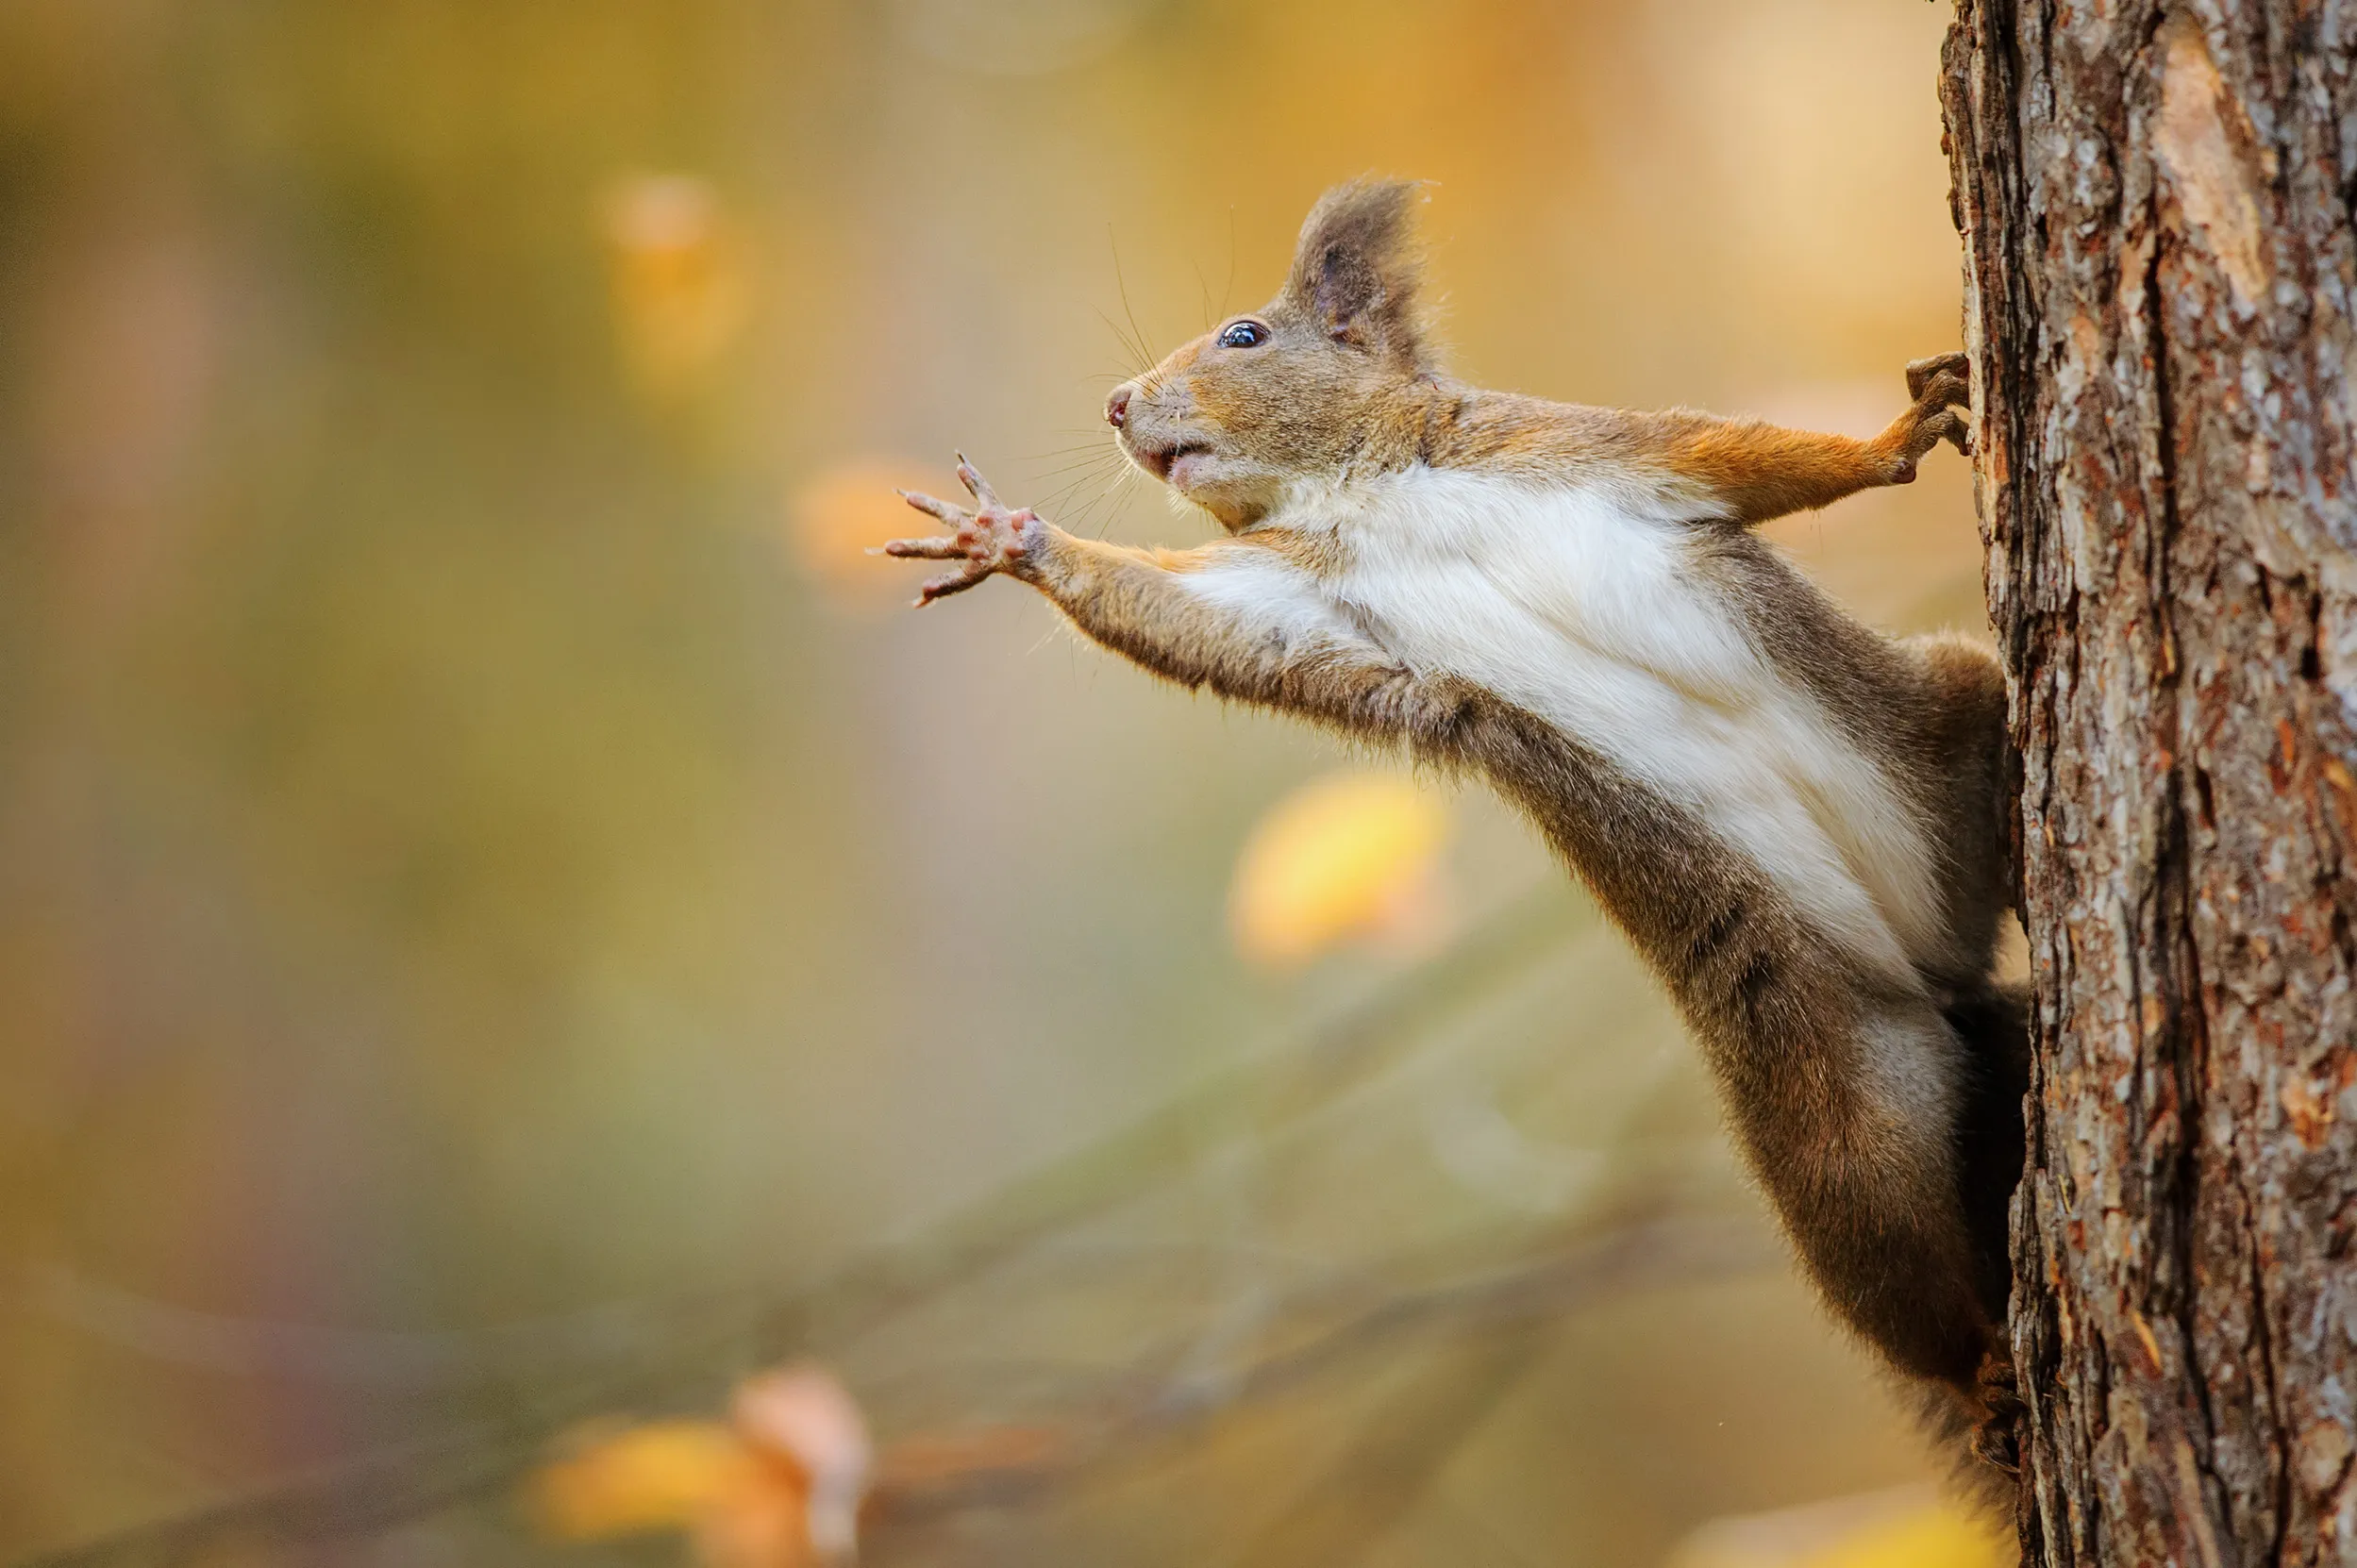 A Red Squirrel hanging onto a tree with one paw, reaching out with the other.